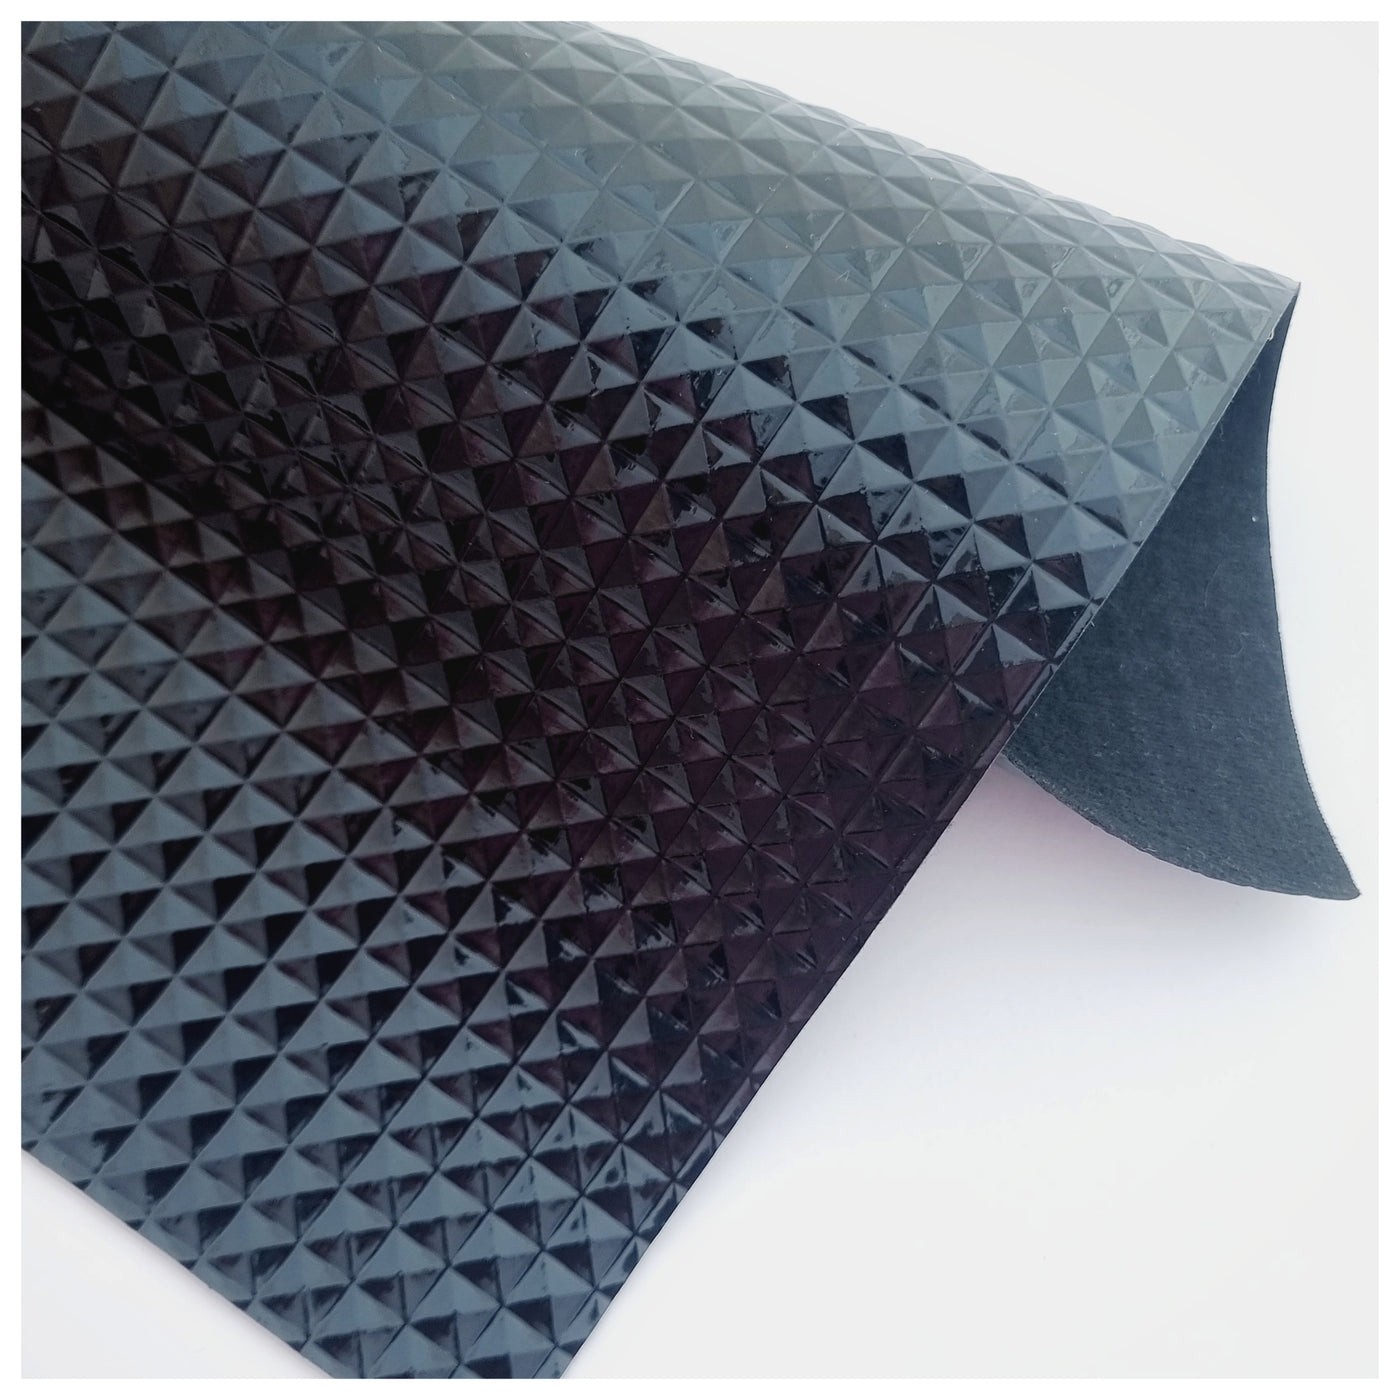 A4 Sheet of Black Grid Patent Faux Leather (0.8mm)